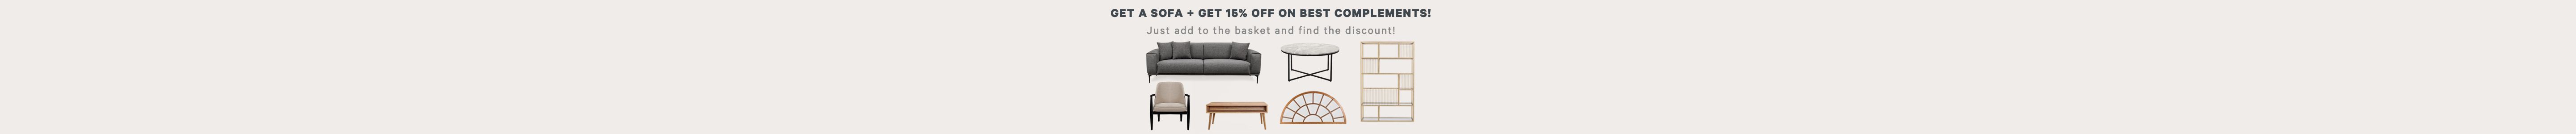 GET A SOFA + GET 15% OFF ON BEST COMPLEMENTS!